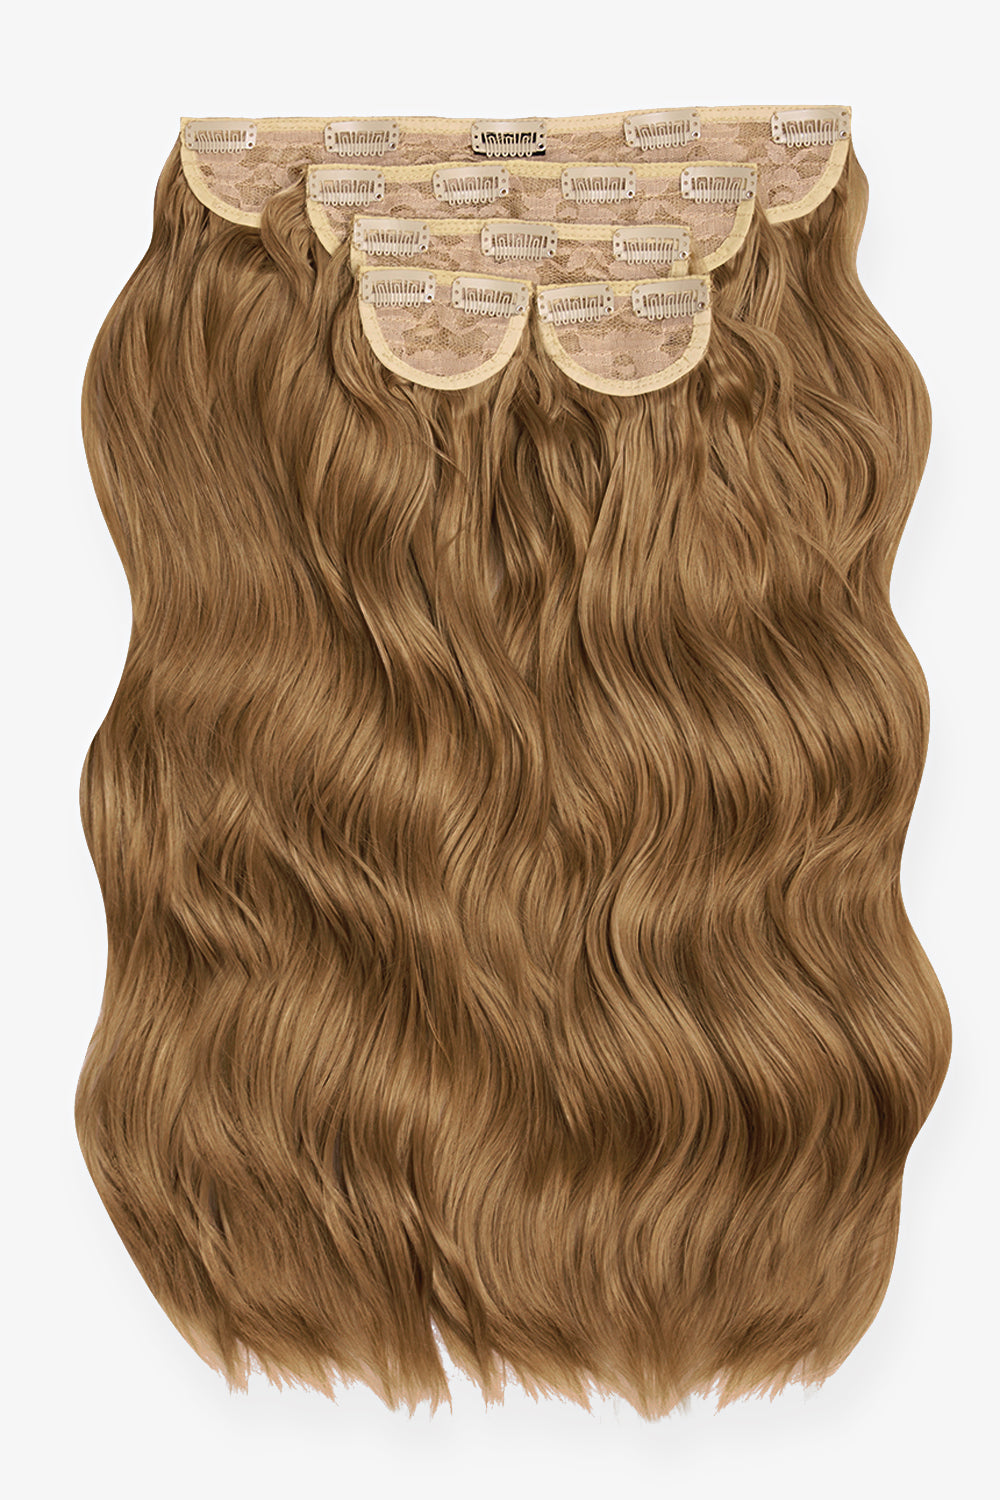 Super Thick 22" 5 Piece Brushed Out Wave Clip in Hair Extensions + Hair Care Bundle - Harvest Blonde